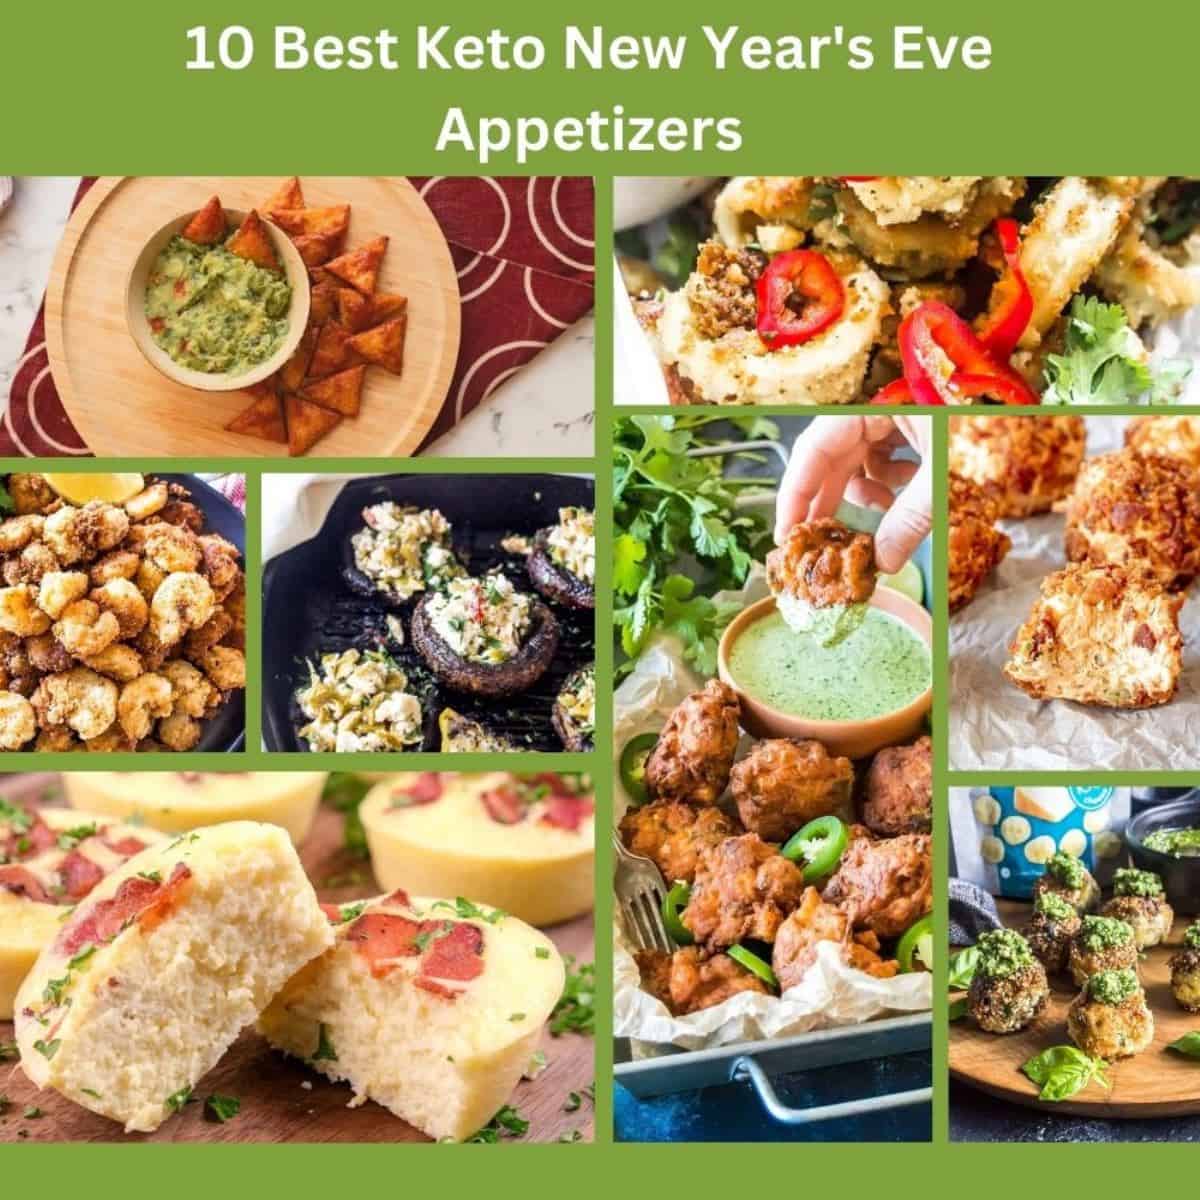 10 Best Keto New Year’s Eve Appetizers